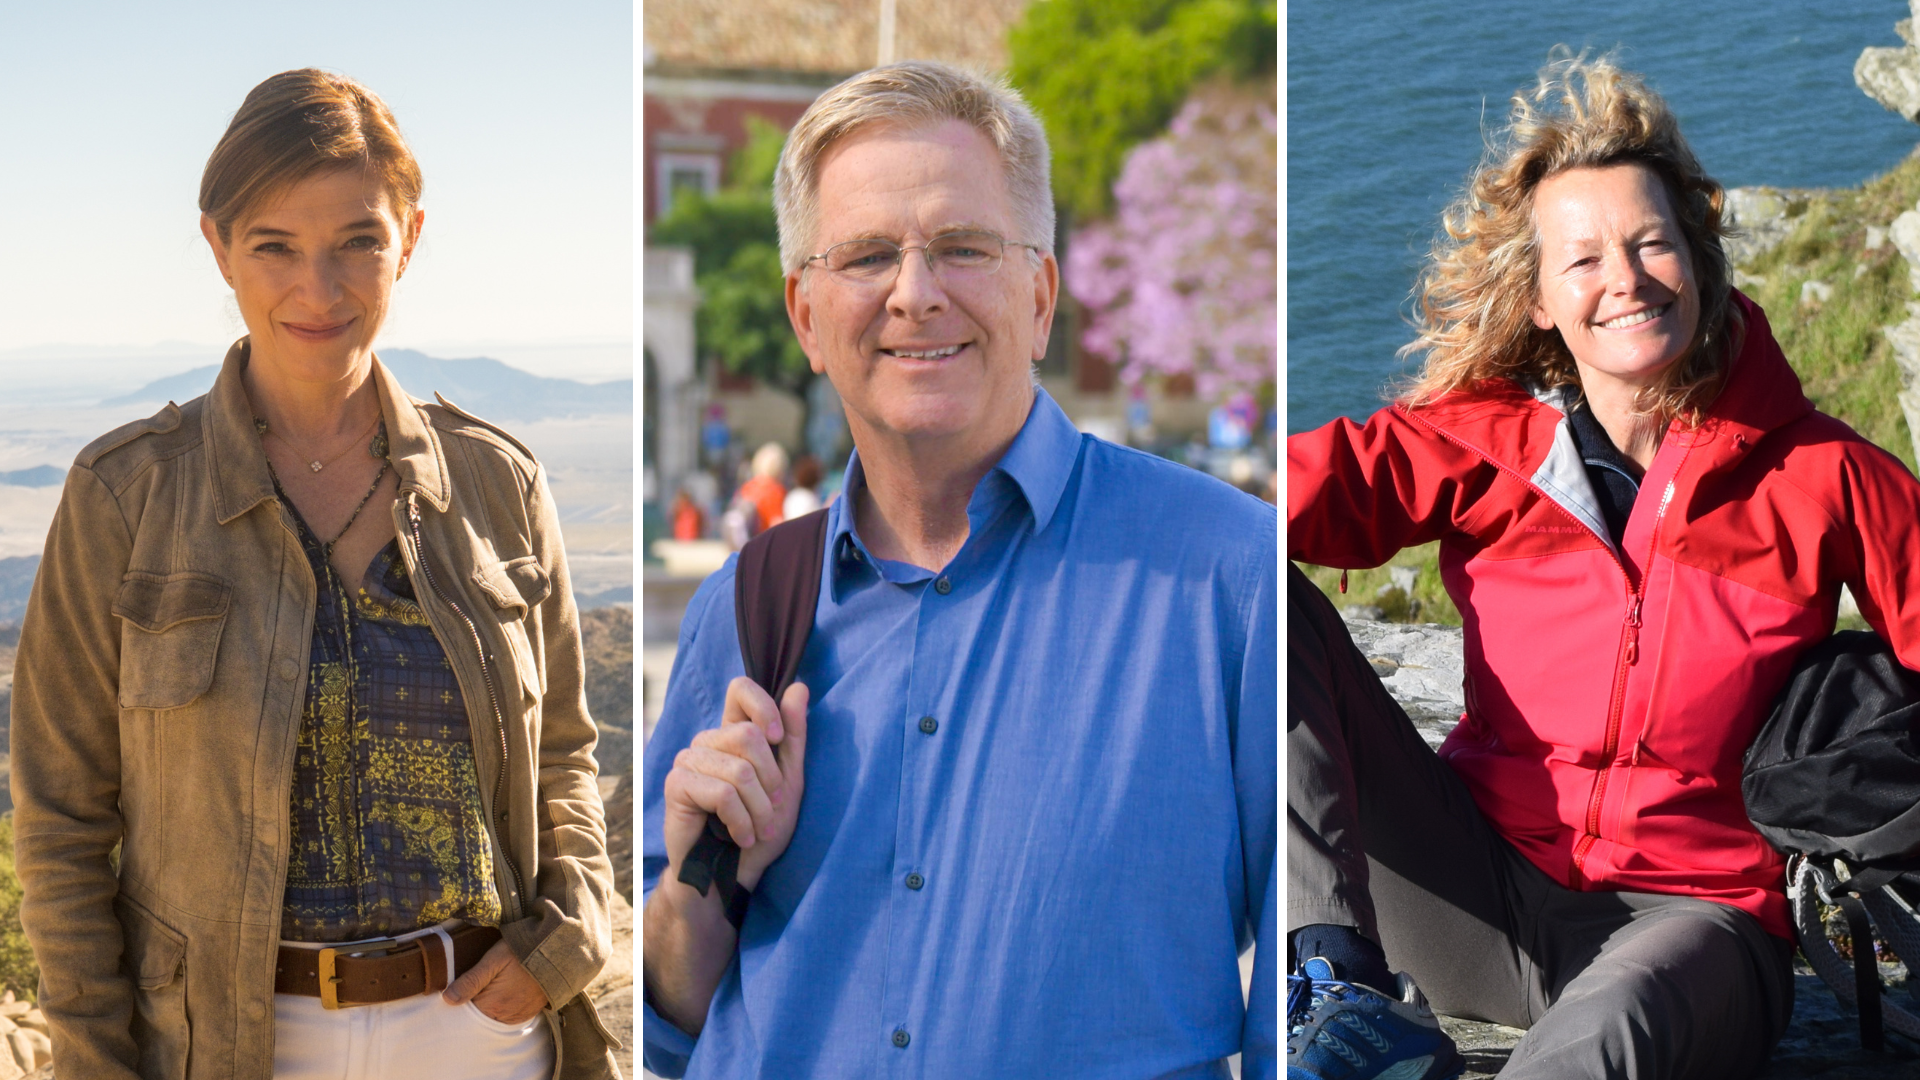 Travel Shows for the Summer - La Frontera with Pati Jinich, Rick Steves Europe, Kate Humble's Coastal Britain